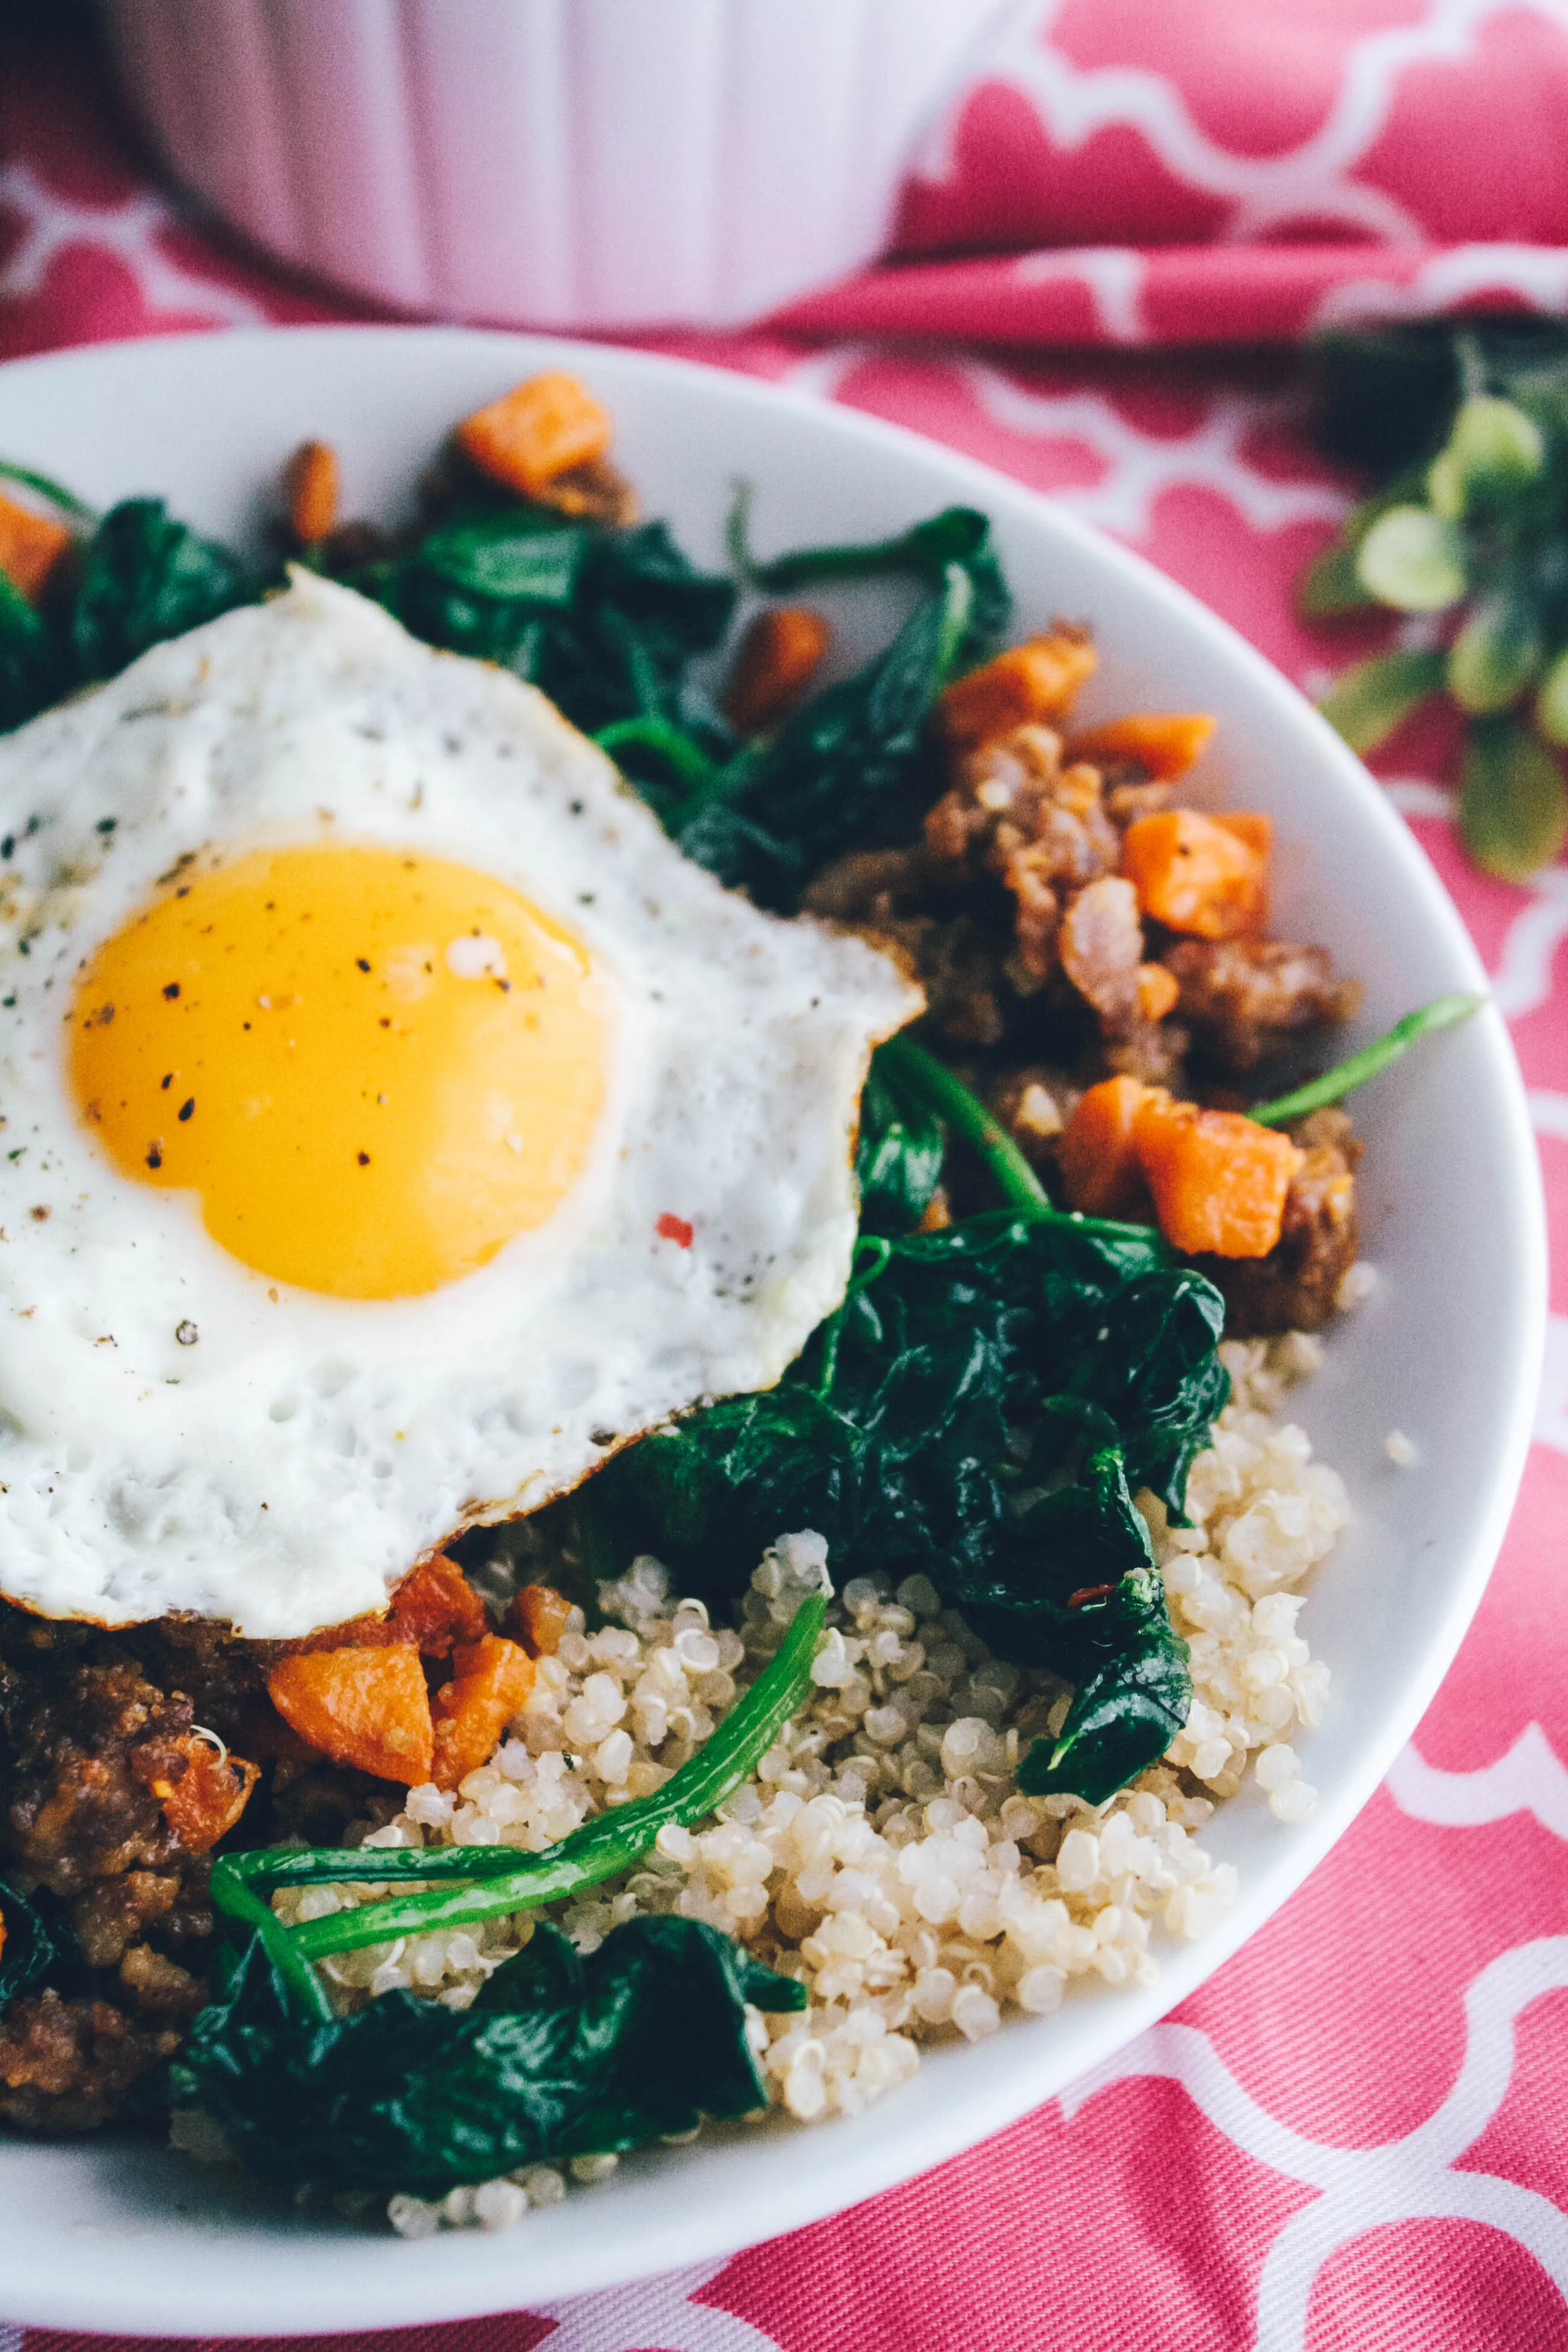 Sausage, Sweet Potato & Spinach Quinoa Bowls with Egg make a wonderful and filling meal. Sausage, Sweet Potato & Spinach Quinoa Bowls with Egg are filling and flavorful!